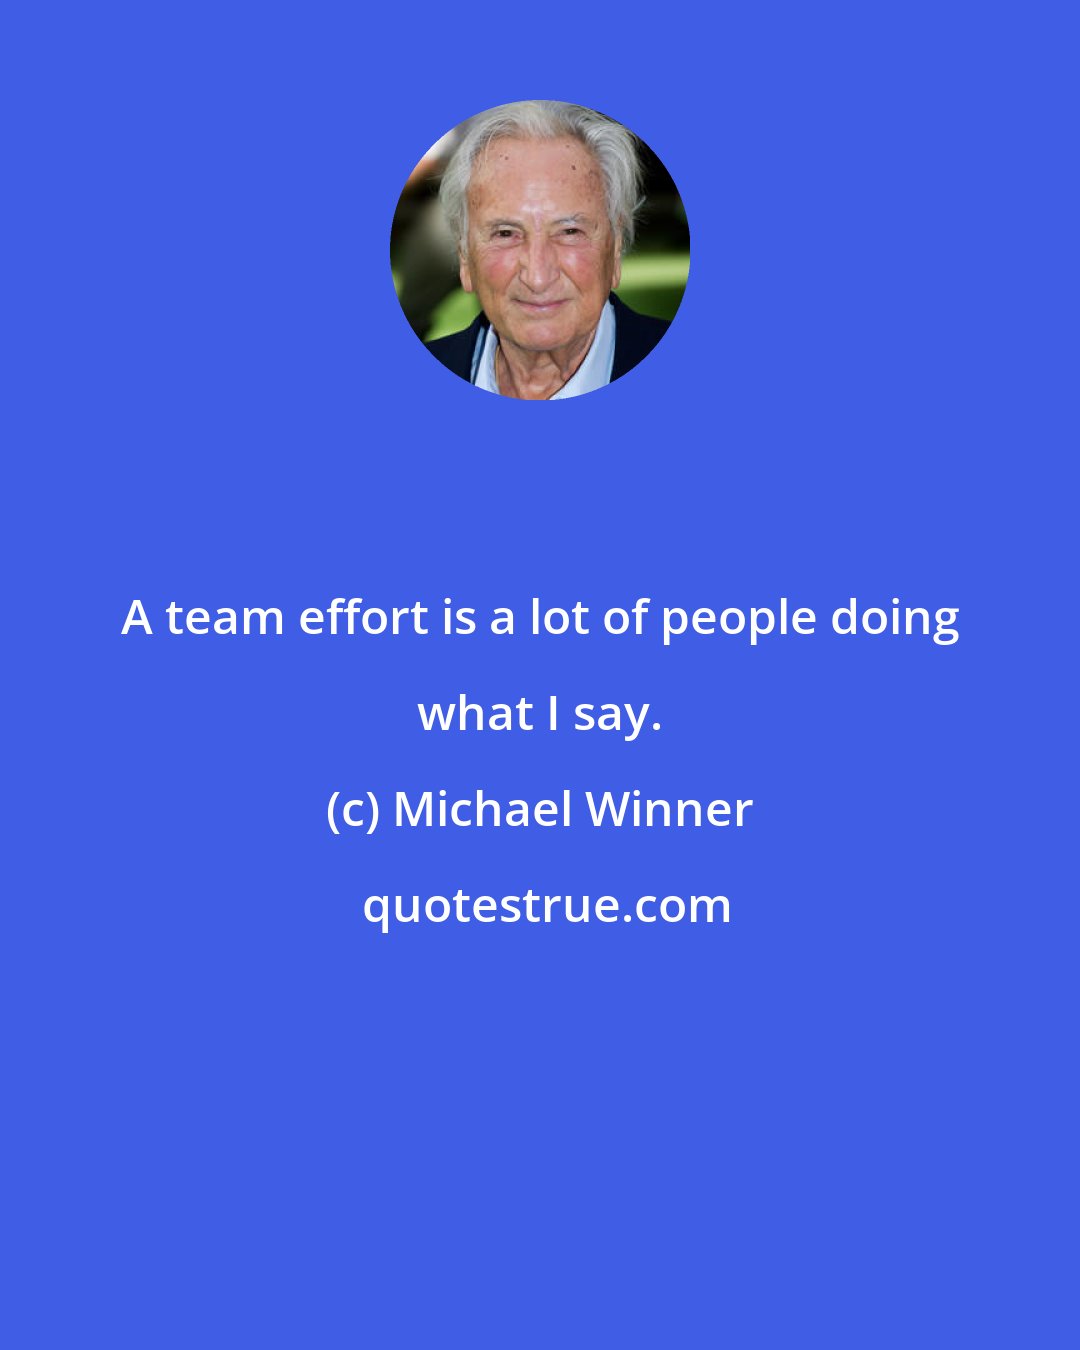 Michael Winner: A team effort is a lot of people doing what I say.